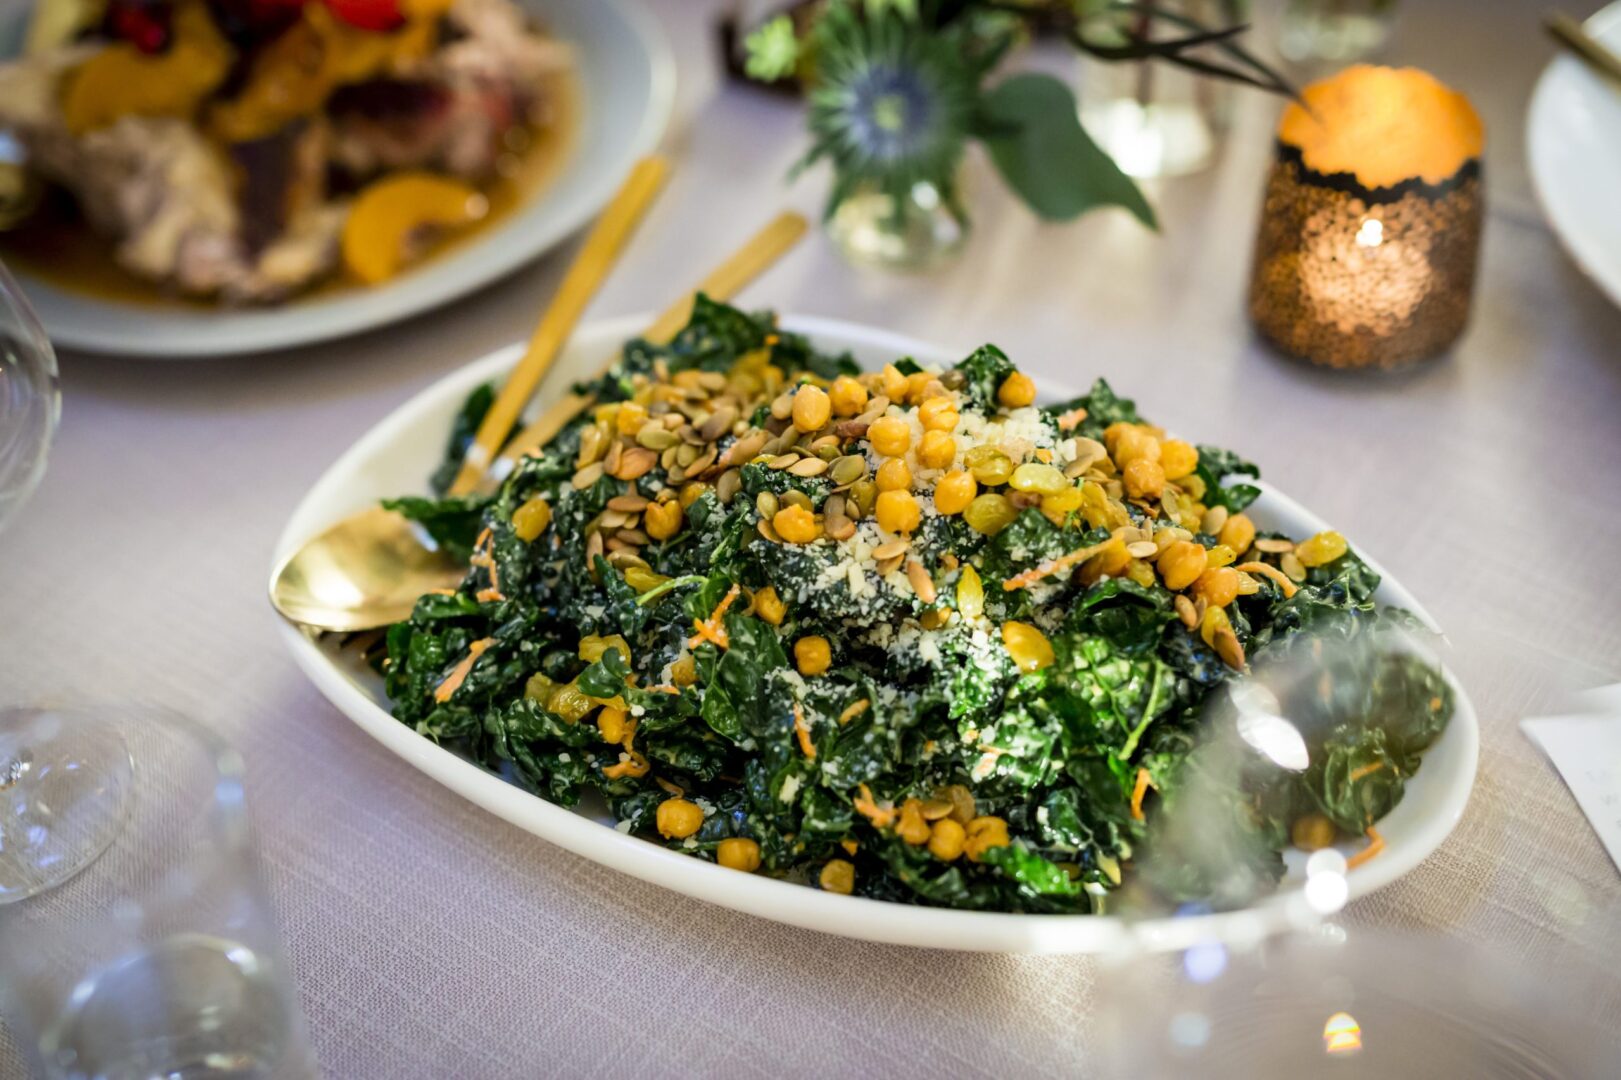 Kale salad with chickpeas on a table.